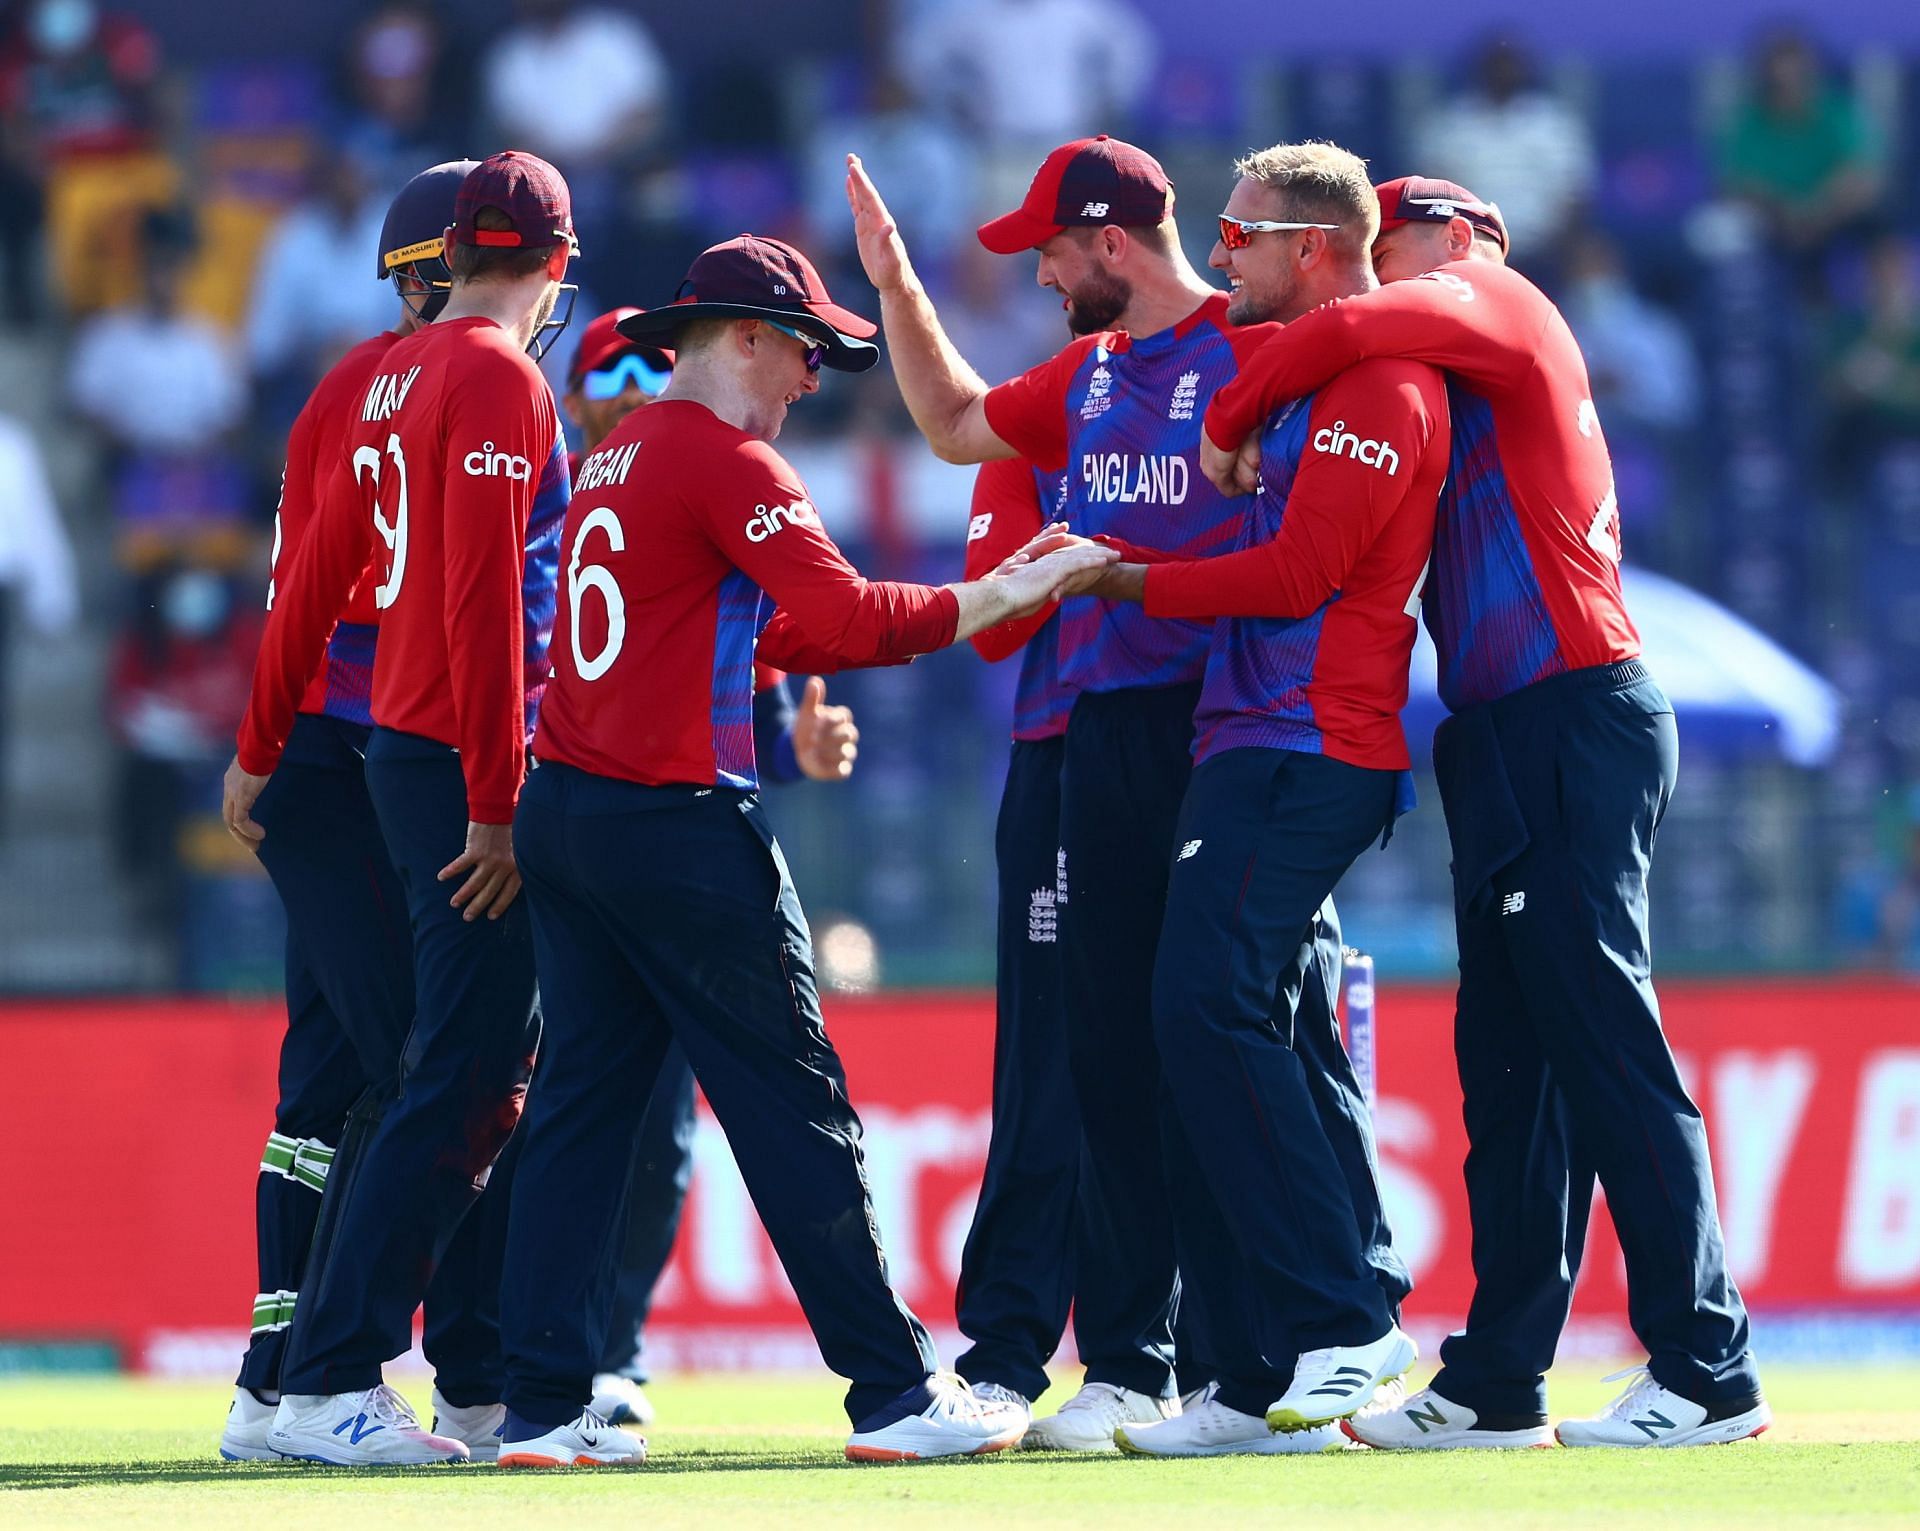 England cricket team during the match against Bangladesh. Pic: Getty Images